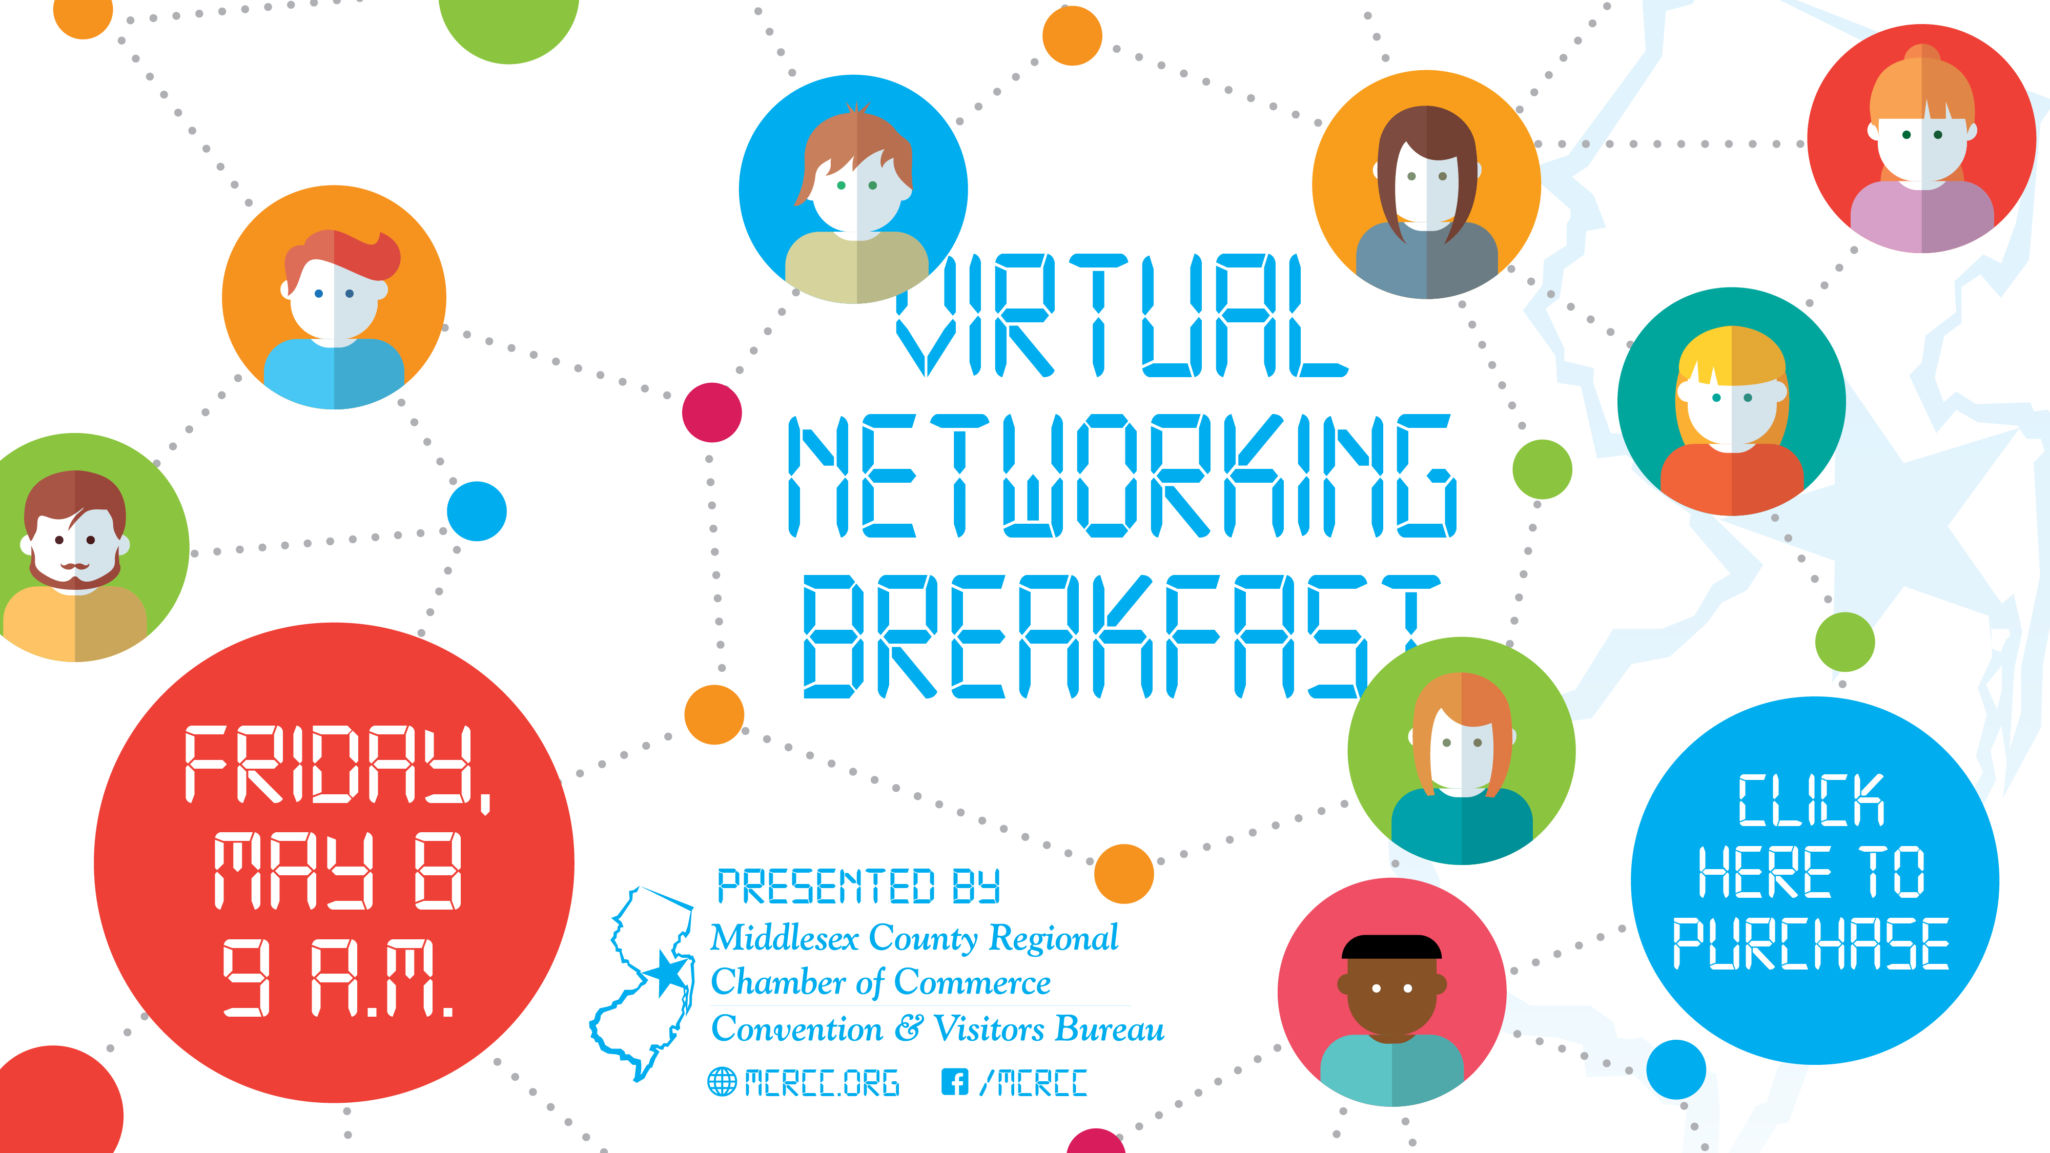 May 8th Virtual Networking Breakfast